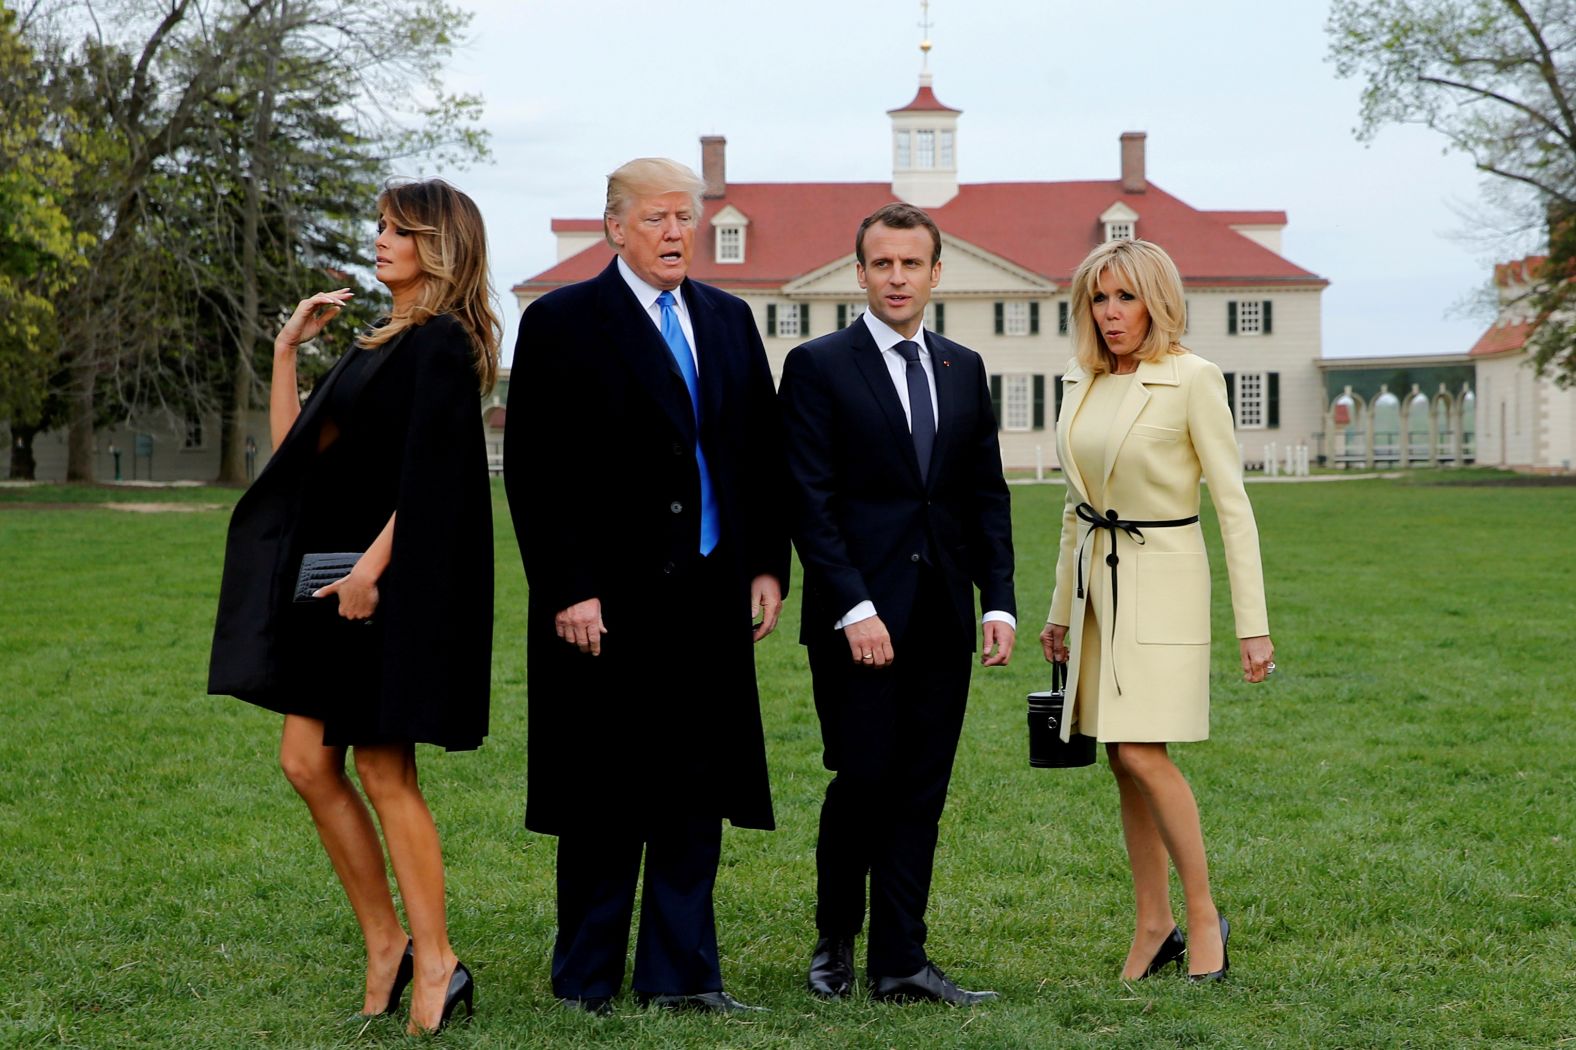 From left, first lady Melania Trump, President Trump, French President Emmanuel Macron and Brigitte Macron prepare to have their picture taken on a visit to the estate of the first US president, George Washington, in Mount Vernon, Virginia, on April 23. "I'm always happy for events that take us off the White House campus and provide new visual opportunities," said photographer Jonathan Ernst. "This day, when the Trumps feted the Macrons at George Washington's historic estate, it provided just the right contrast for the stylish leader-couples as they took their spots for an otherwise posed moment."